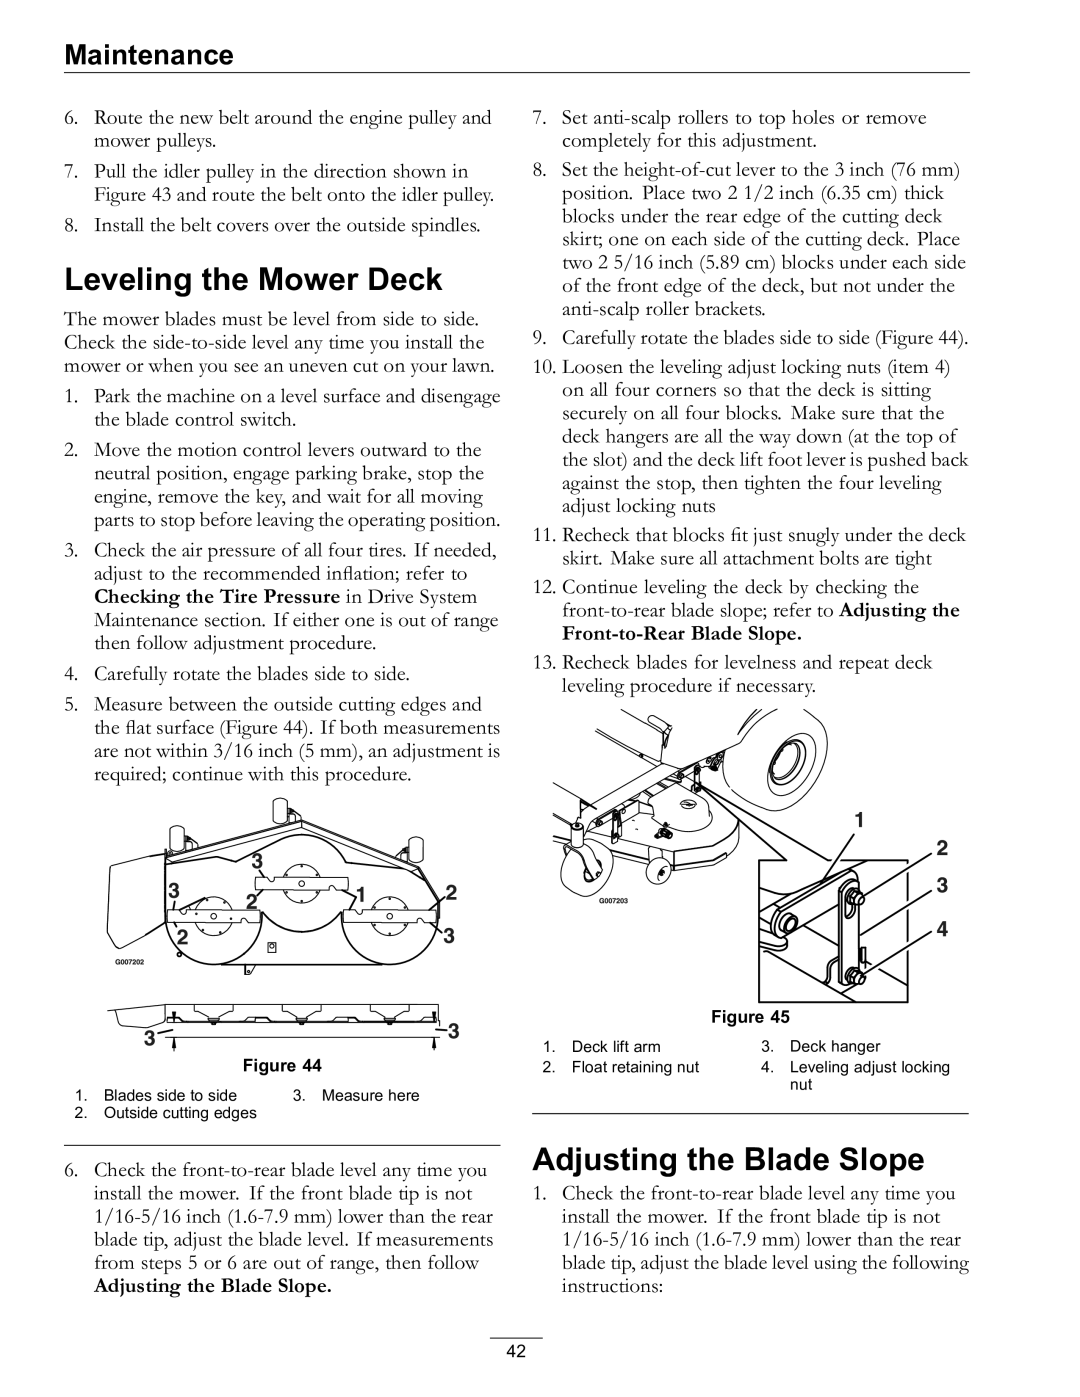 Exmark Lawn Mower manual Leveling the Mower Deck, Adjusting the Blade Slope 